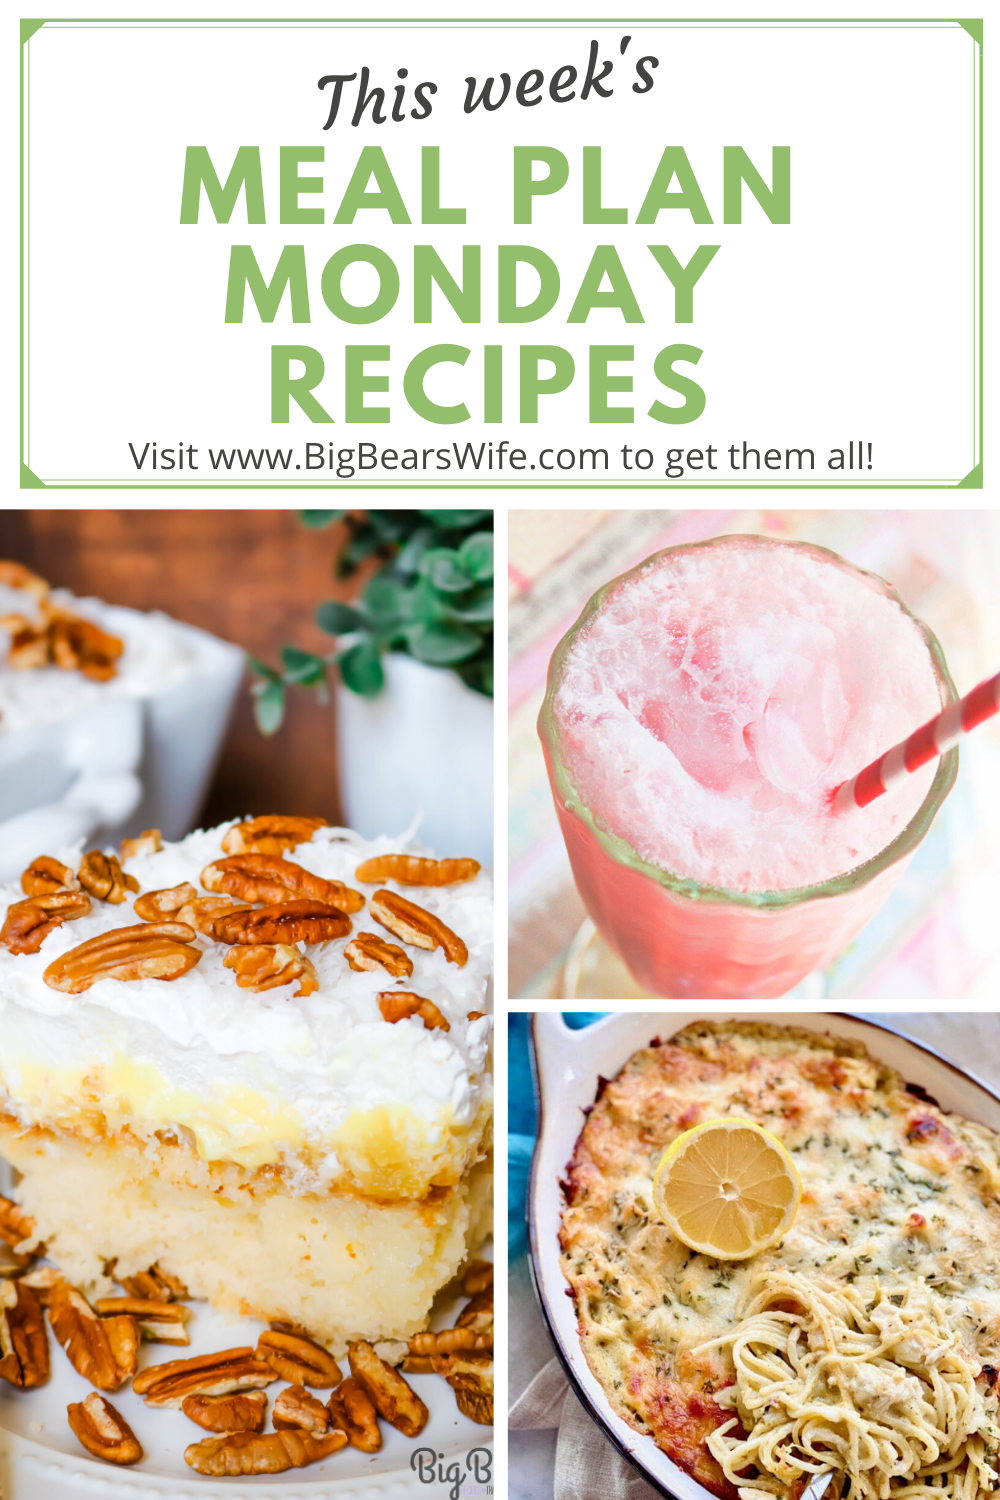 Welcome to this week's Meal Plan Monday!! For Meal Plan Monday 225 we're featuring recipes like, Italian Chopped Salad, Lemon Chicken Spaghetti, Strawberry-Coconut Cream Soda, and Southern Pineapple Sunshine Cake! via @bigbearswife